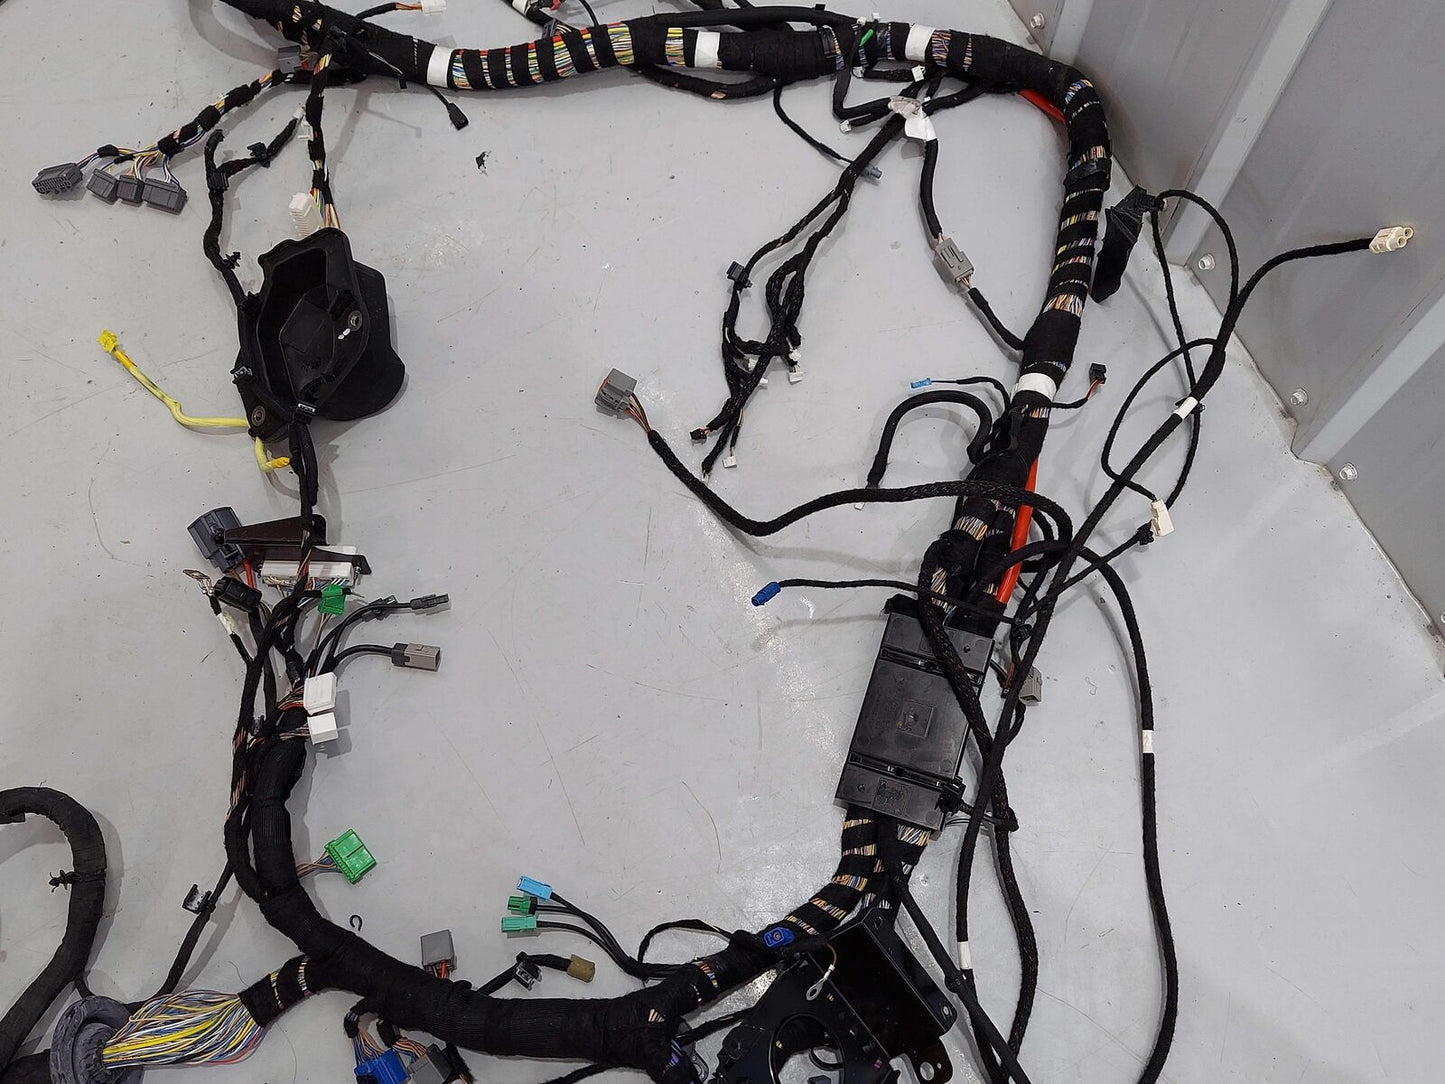 2020 Mclaren 720s Spider Body Wire Wiring Harness *PARTS ONLY Missing Ends!!*